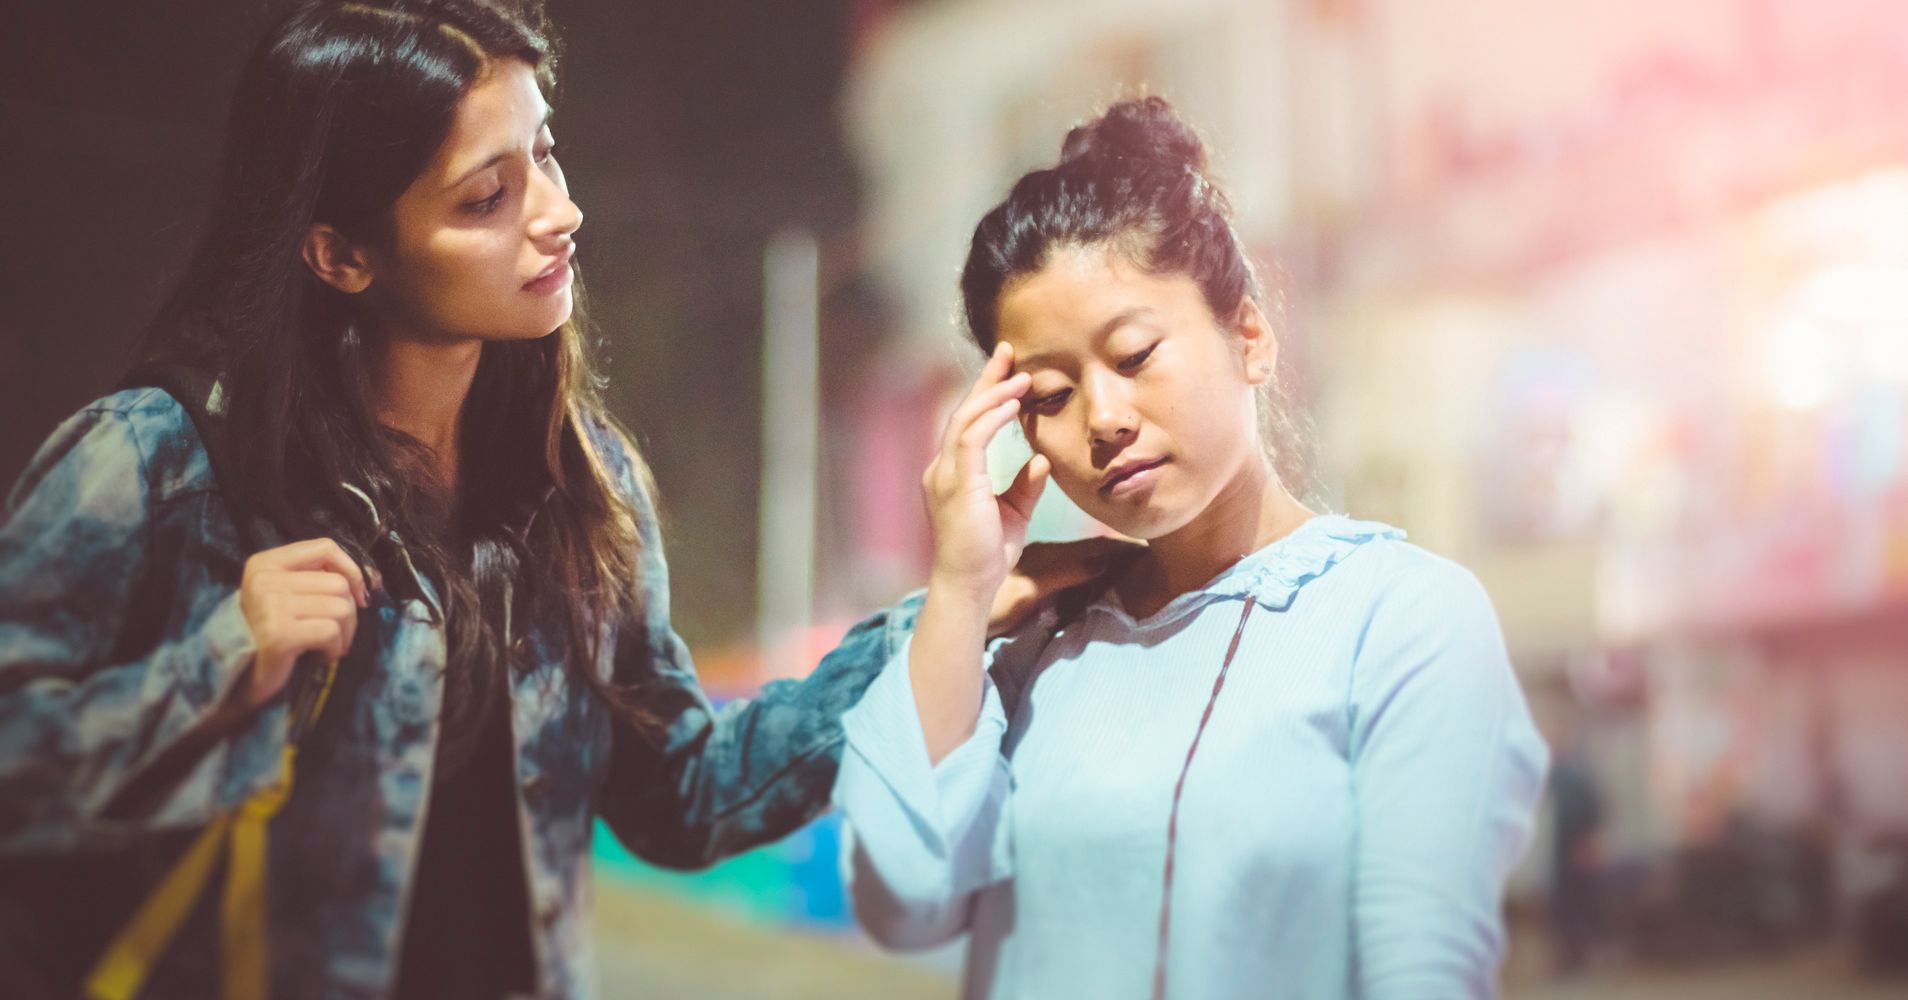 6 Pieces Of Dating Advice Your Single Friend Is Tired Of Hearing From